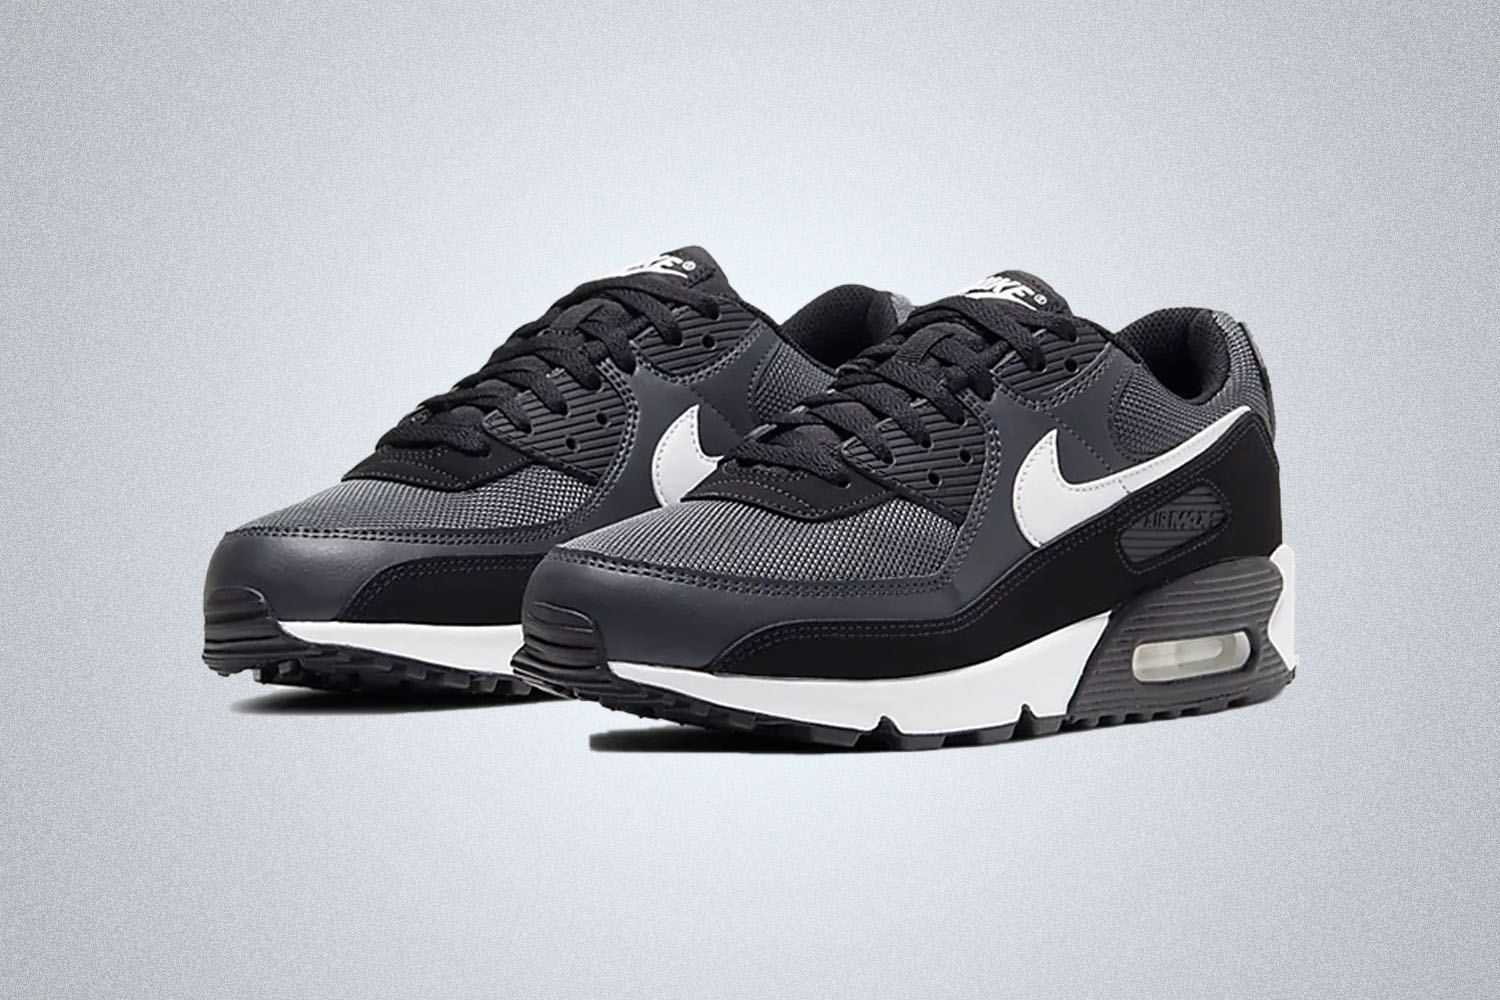 a black white and grey Nike Air Max 90 sneaker on a grey background